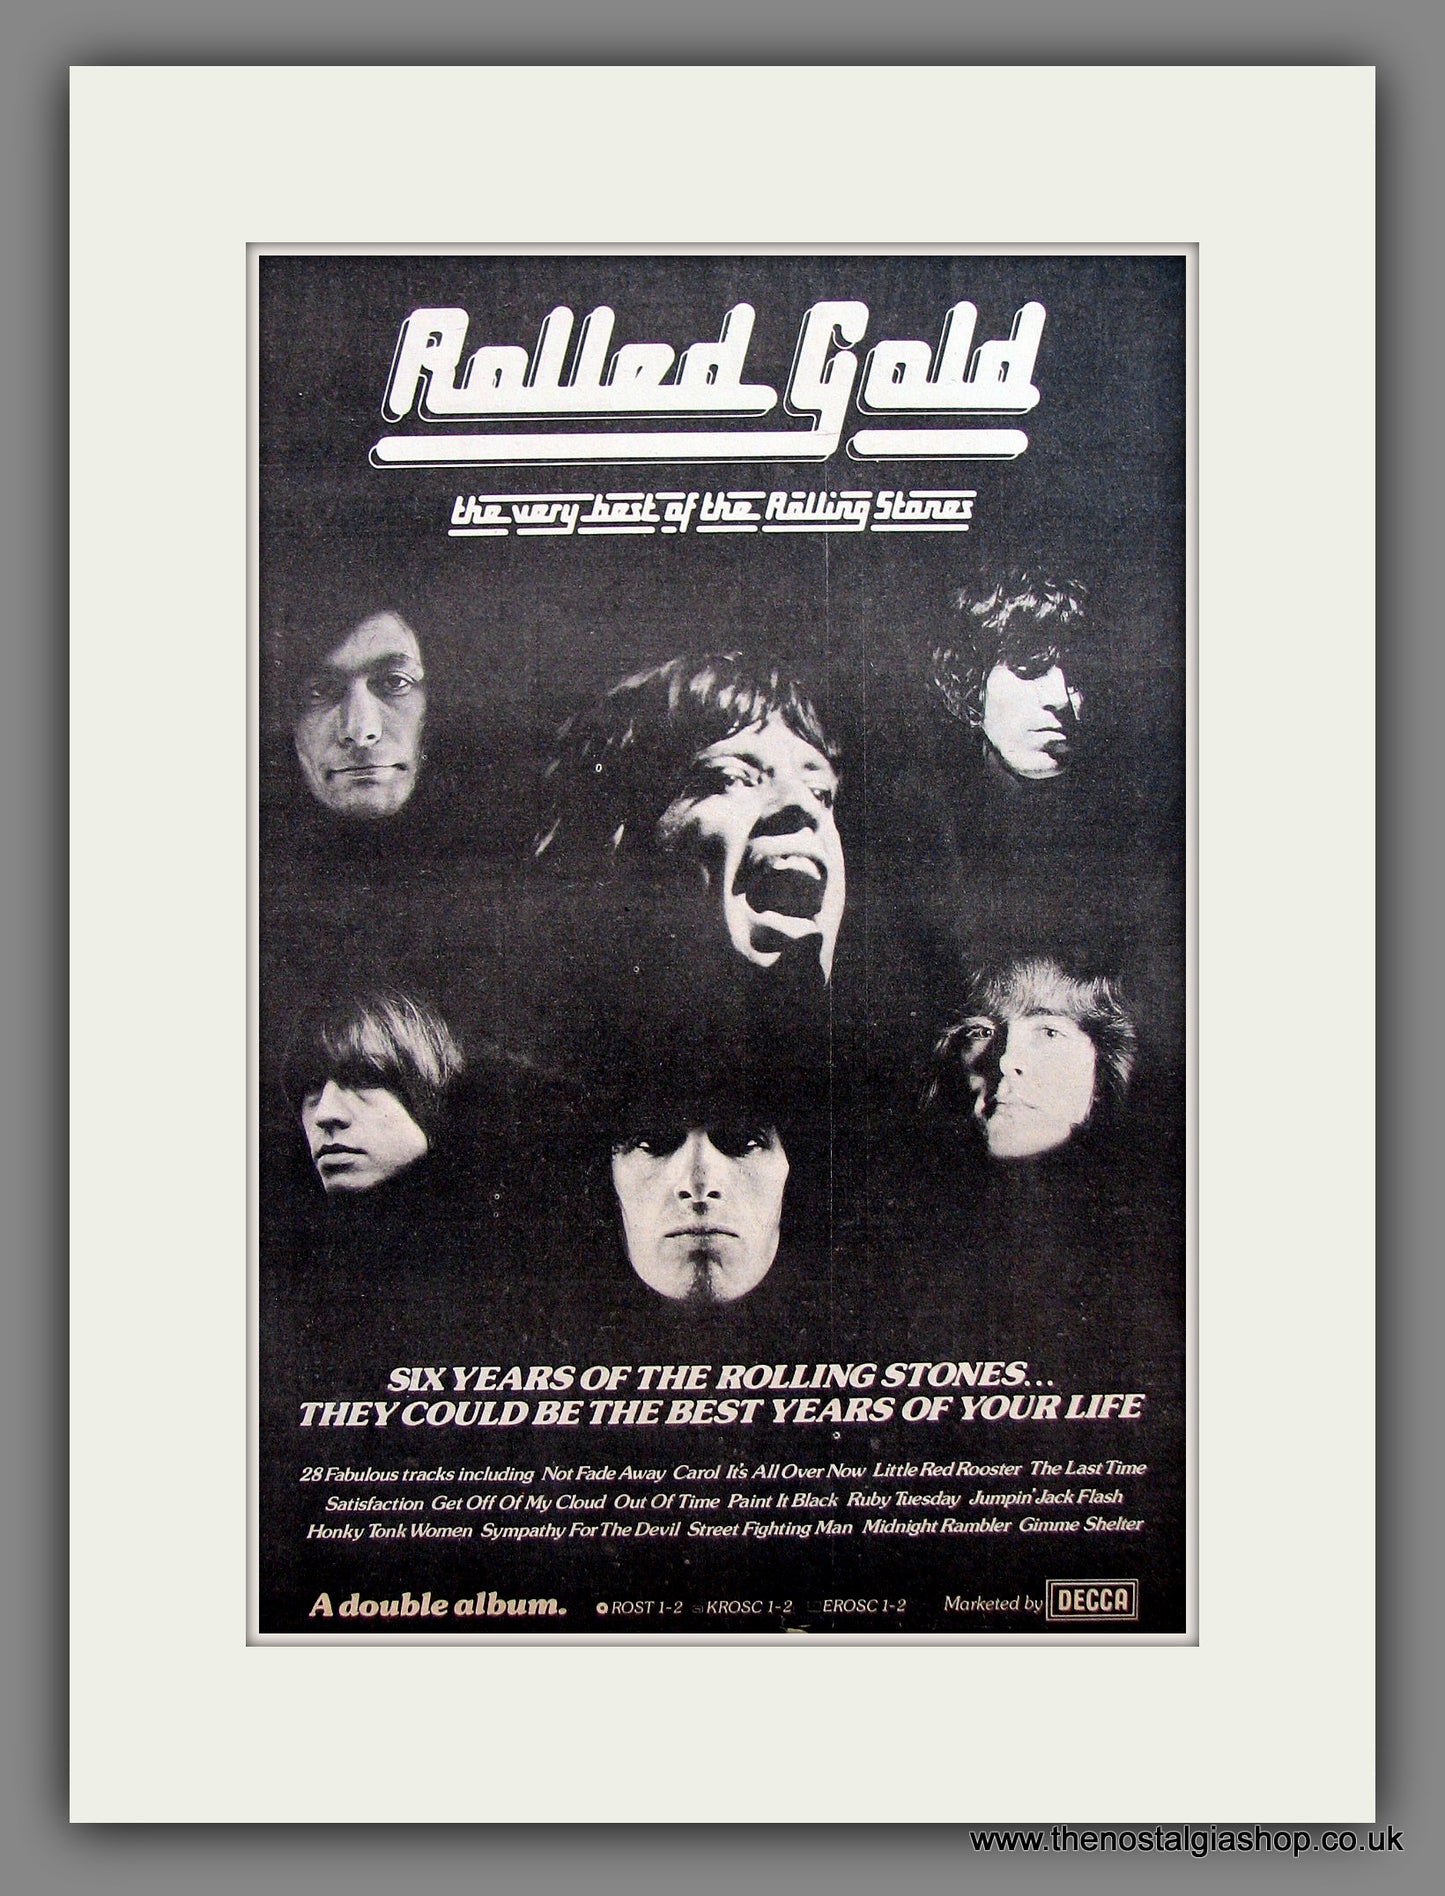 Rolling Stones. Rolled Gold. Vintage Advert 1975 (ref AD13880)